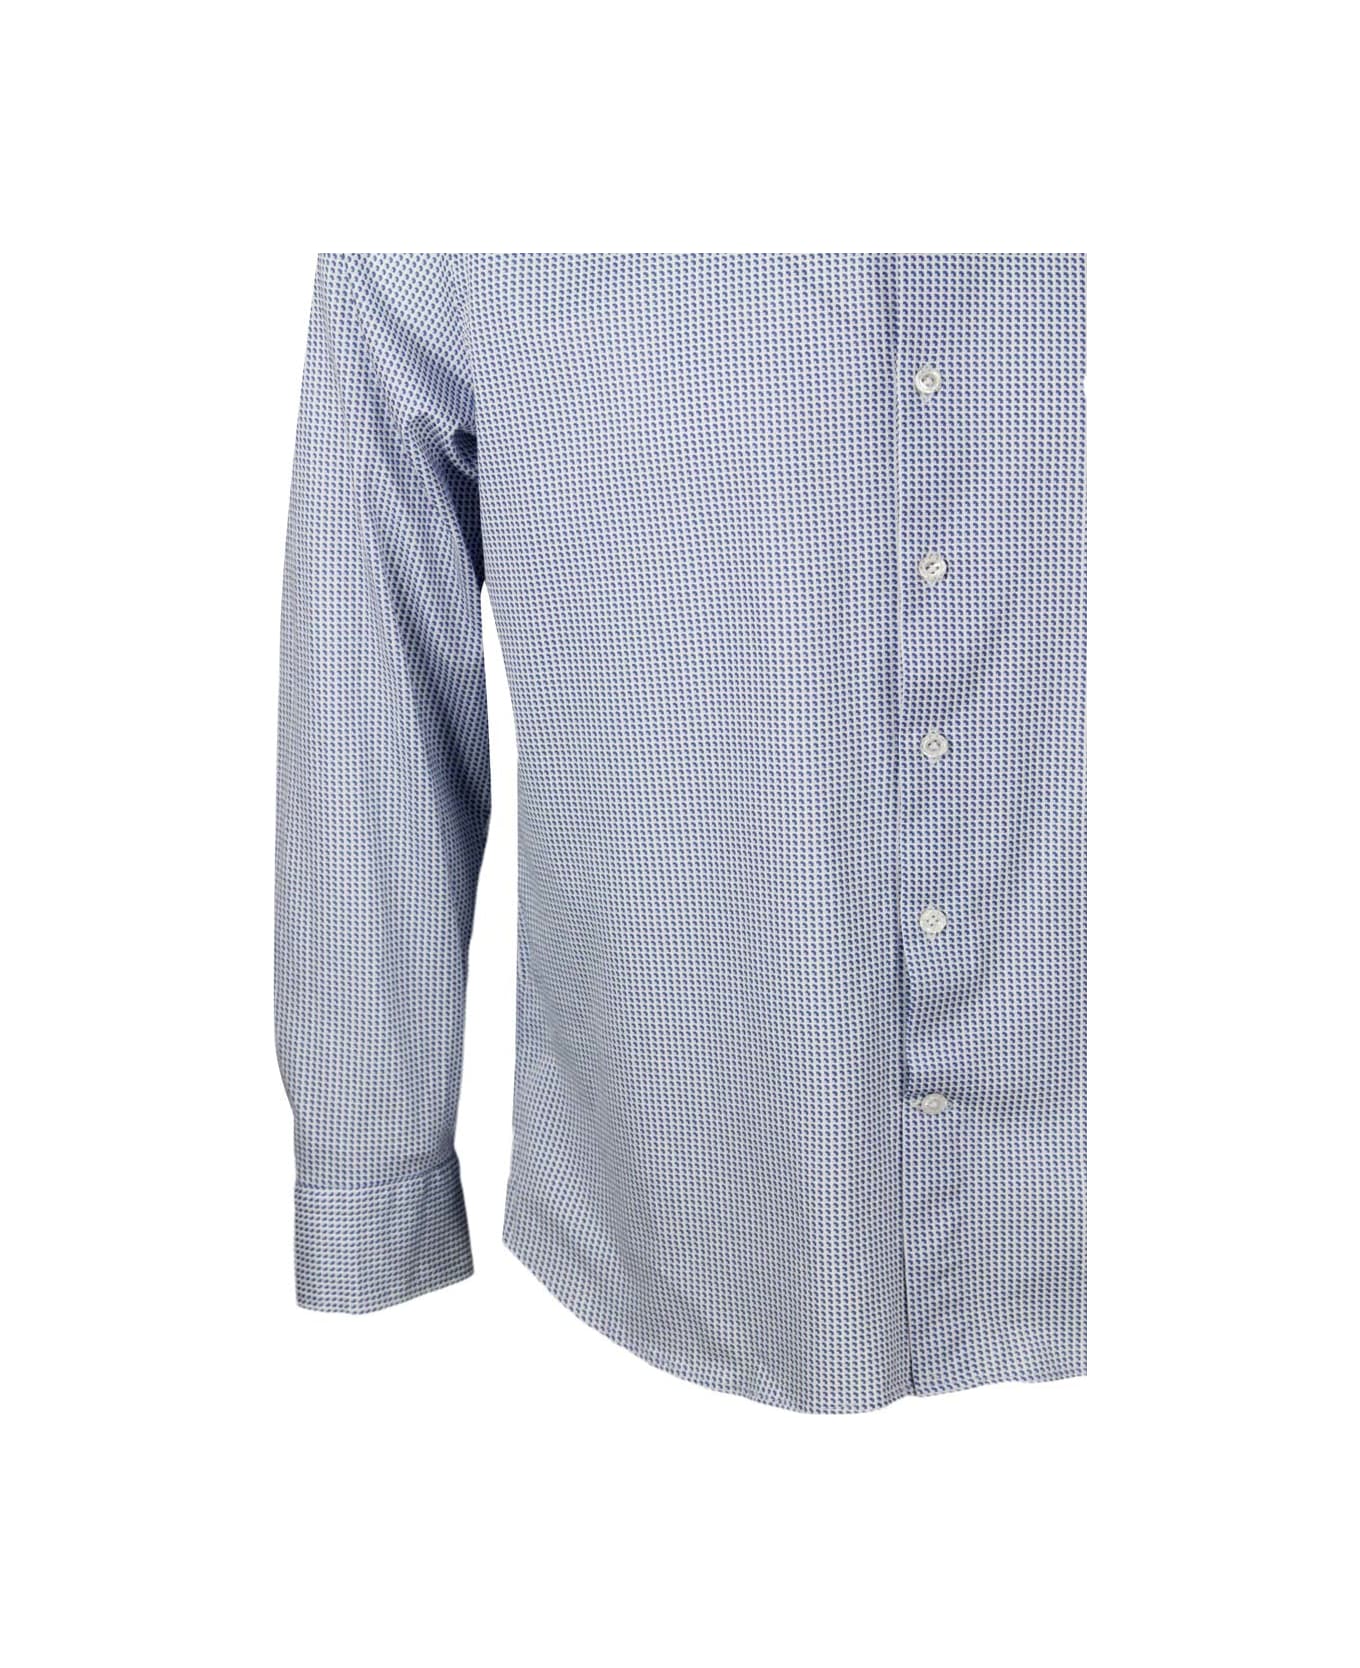 Sonrisa Luxury Shirt In Soft, Precious And Very Fine Stretch Cotton Flower With French Collar In A Small Blue Geometric Micro-pattern Print - White